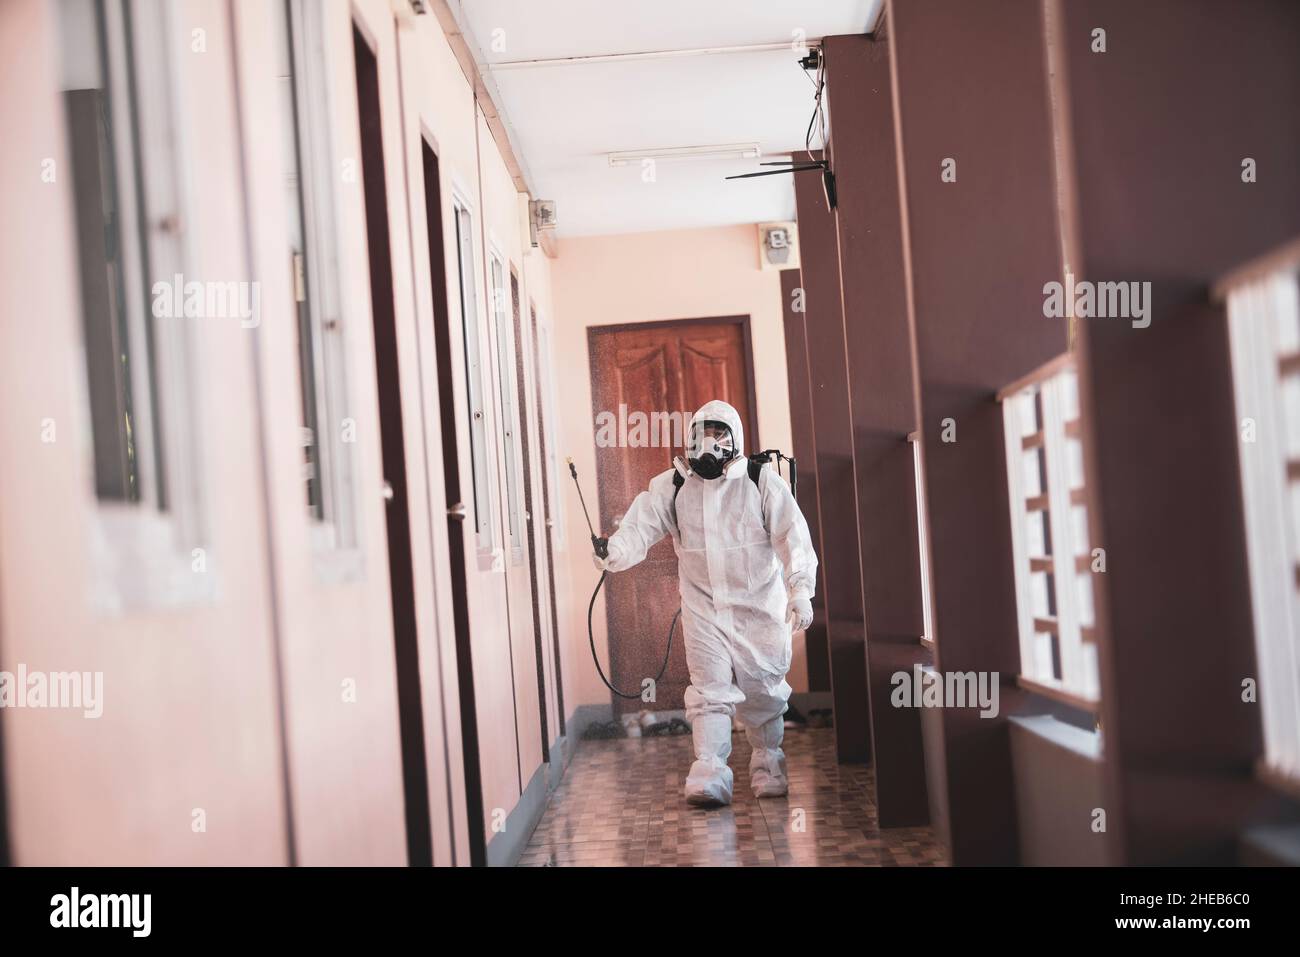 Epidemiologists or health workers wear PPE, spraying disinfectants to prevent the spread of germs or coronavirus. Stock Photo